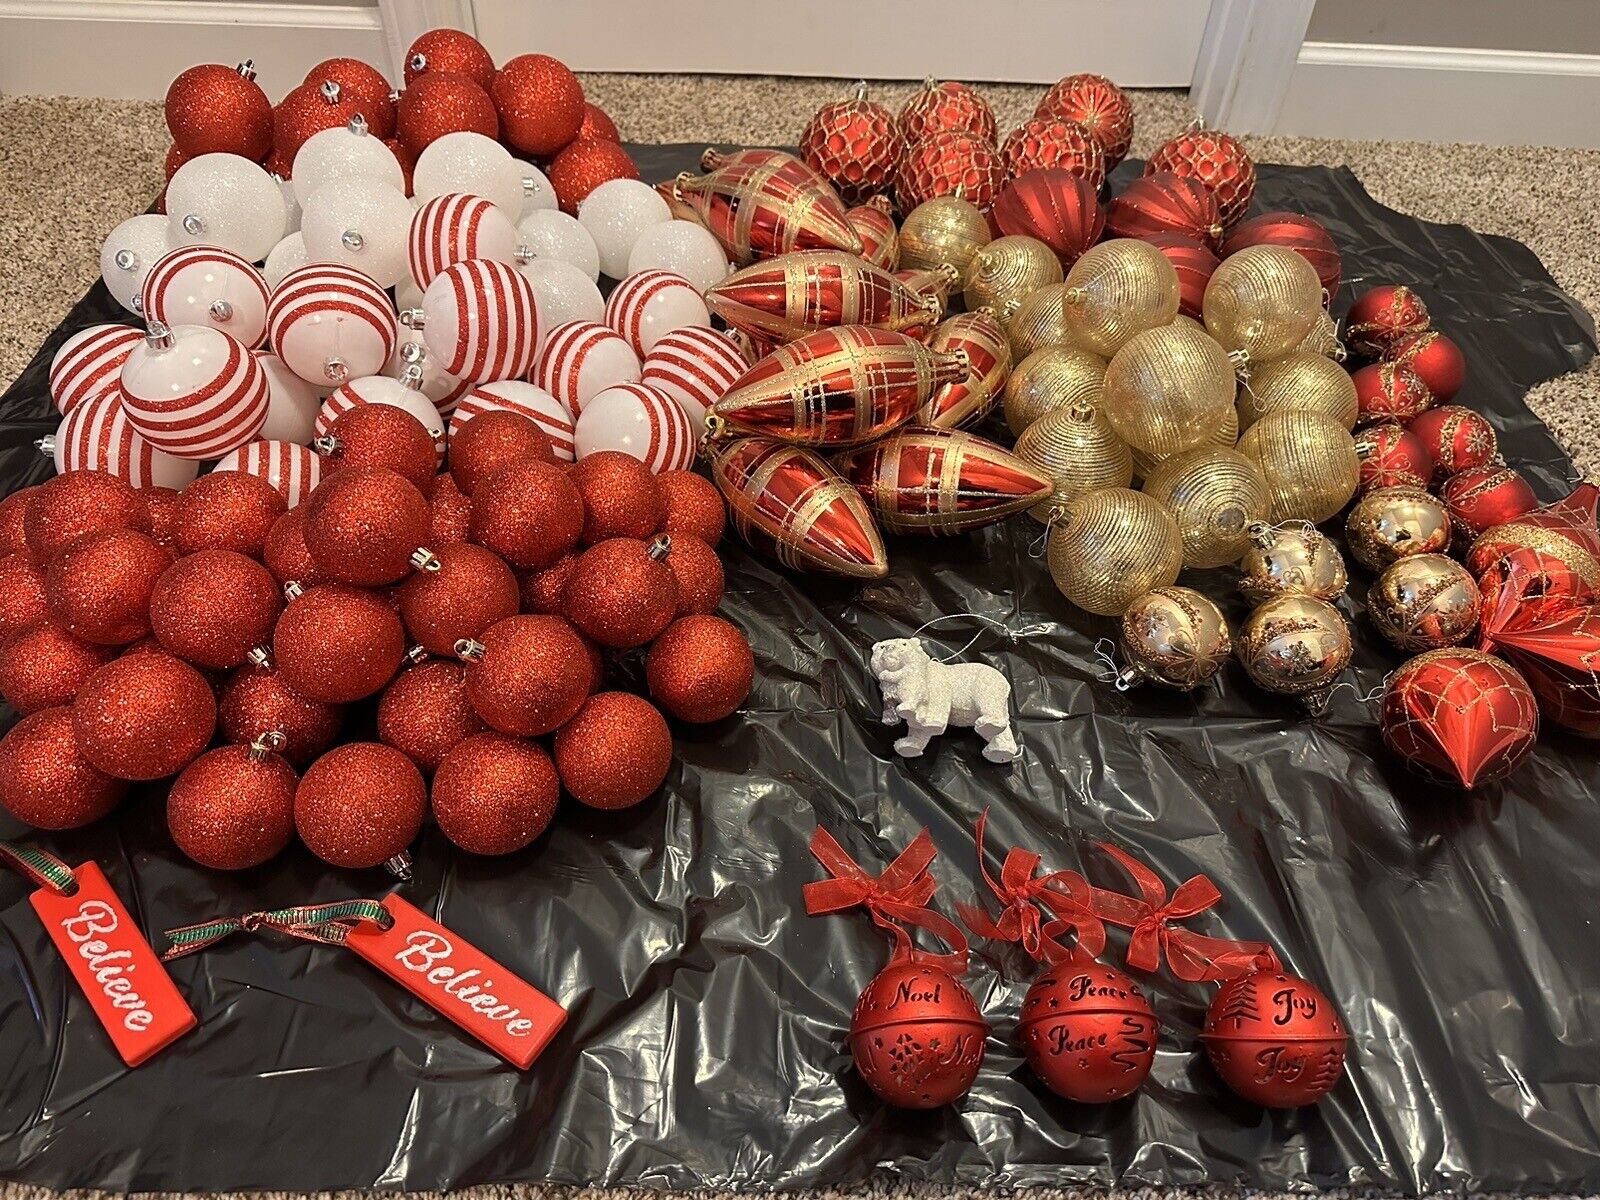 Huge Lot Of 148 Assorted Christmas Ornaments Red White Gold Sparkly Shatterproof